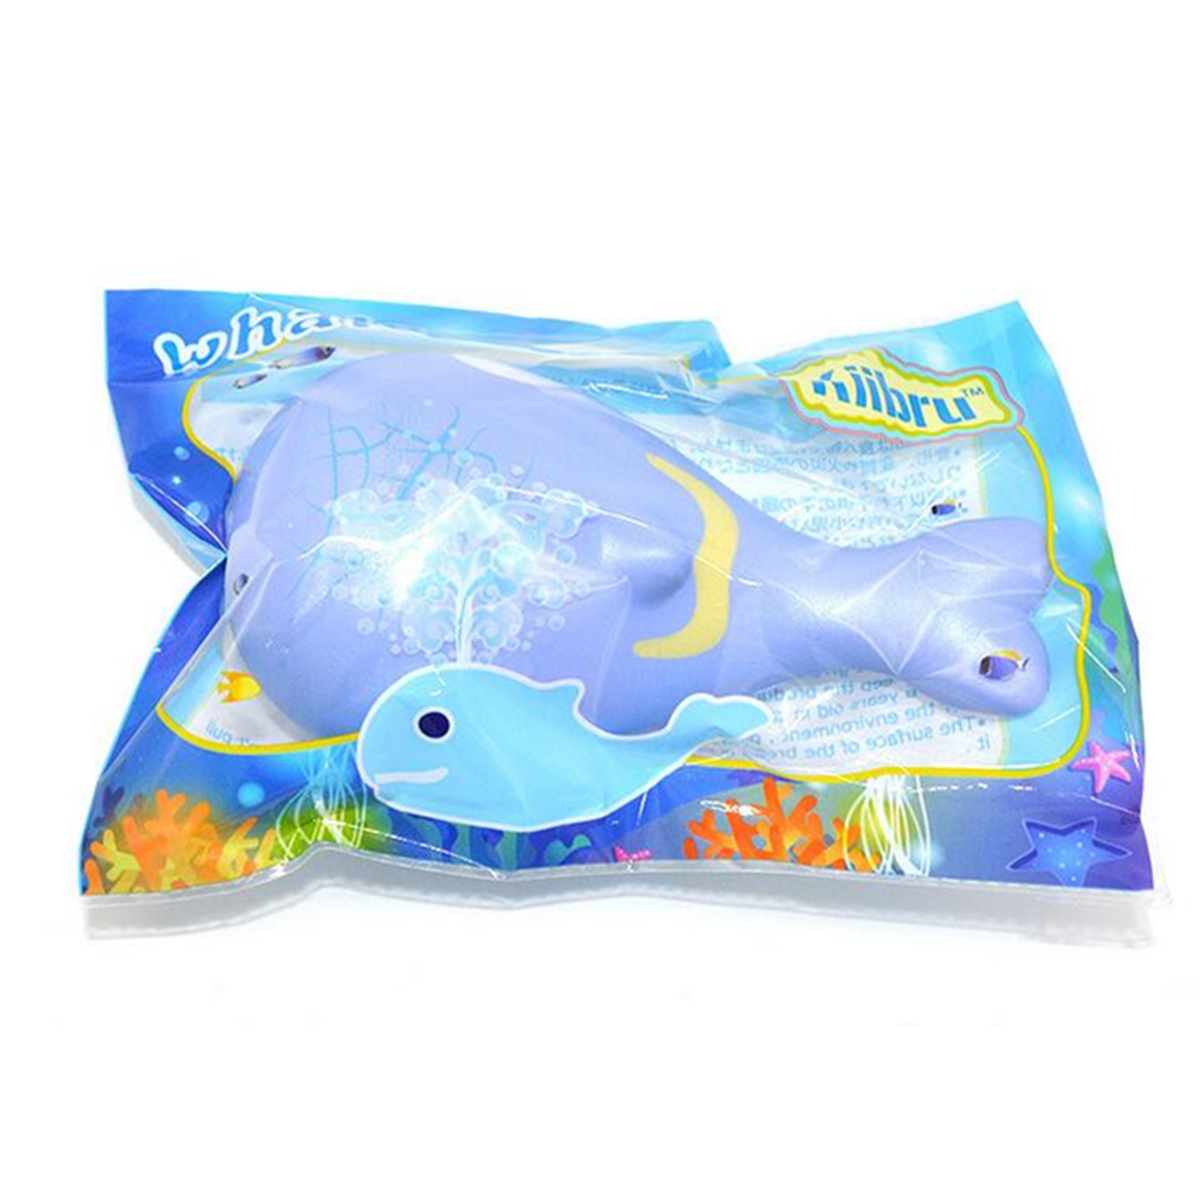 15cm-Whale-Squishy-Slow-Rising-Pressure-Release-Soft-Toy-With-Keychains-for-Iphone-Samsung-Xiaomi-1145805-9